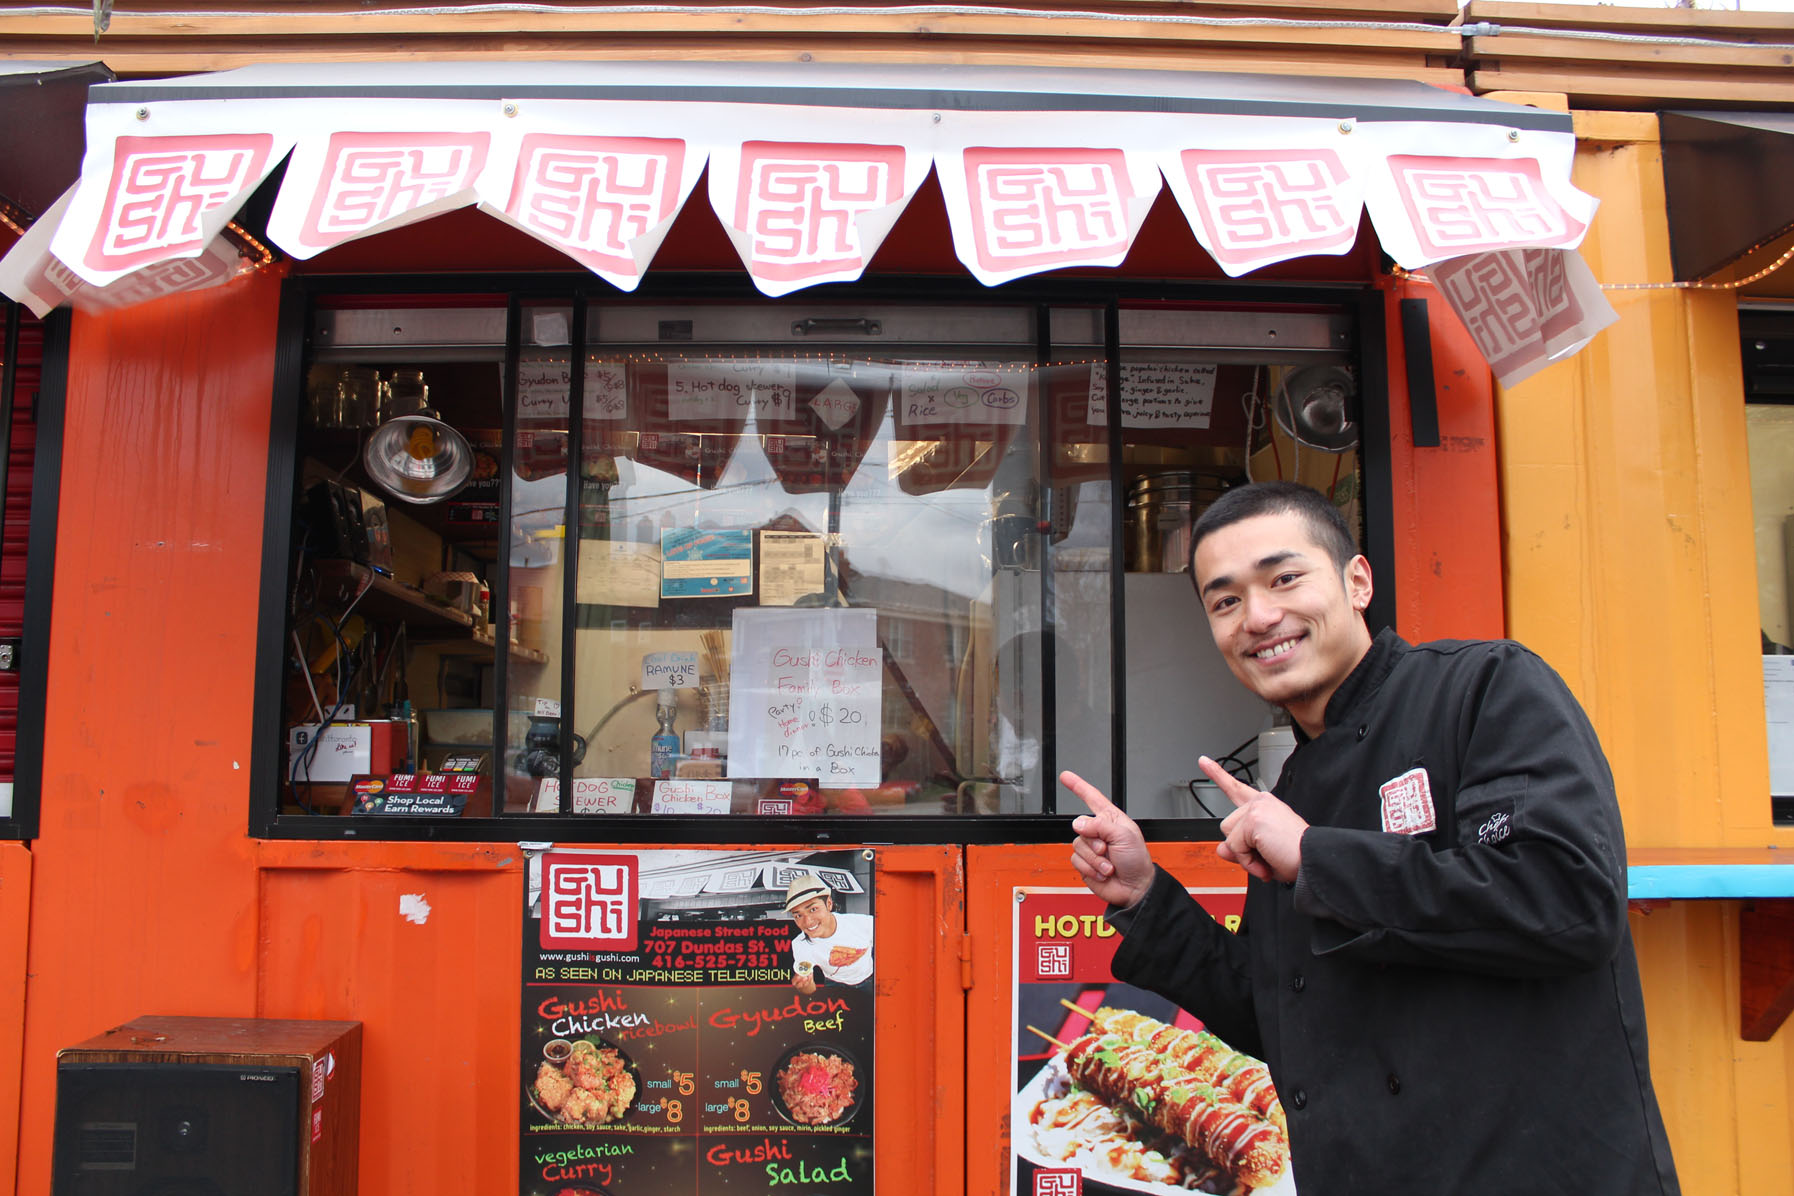 A photograph of Gushi owner Shinji-Yamaguchi in front of his stall in downtown Toronto.